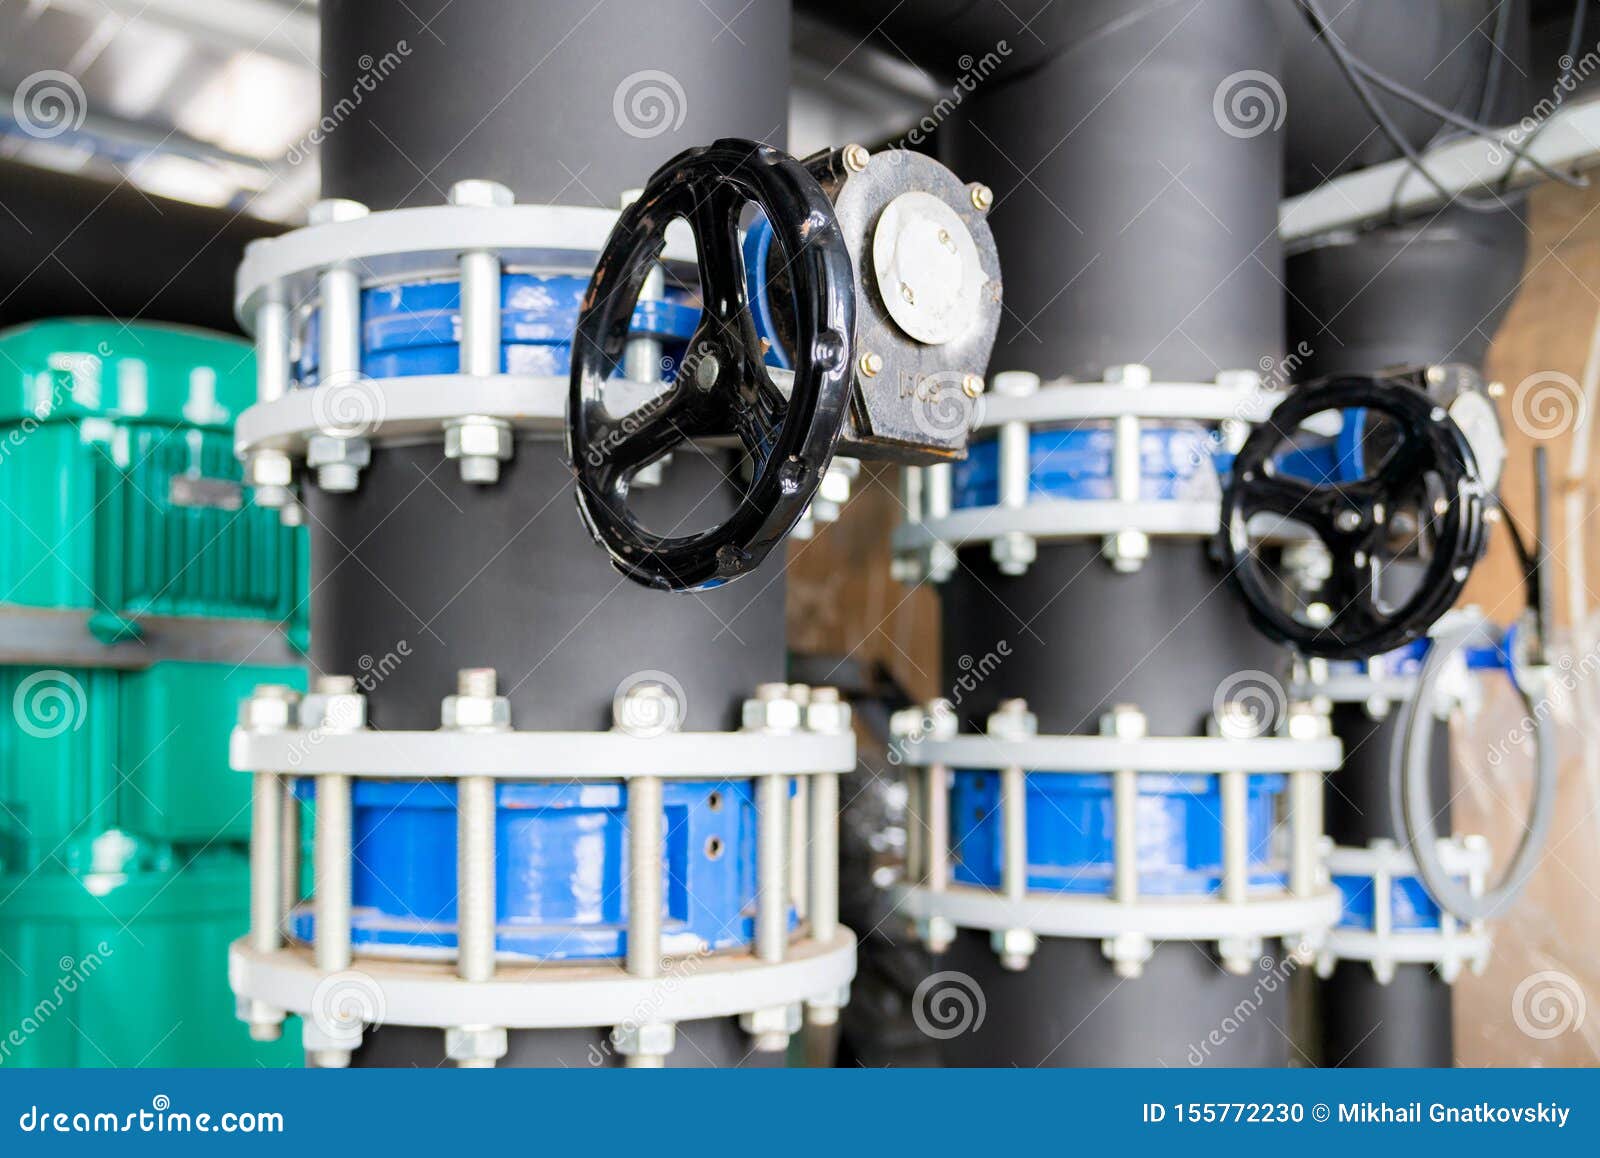 Butterfly Valve at the Connection Hdpe Pipe and Pp-r Pipe. Manual Valve